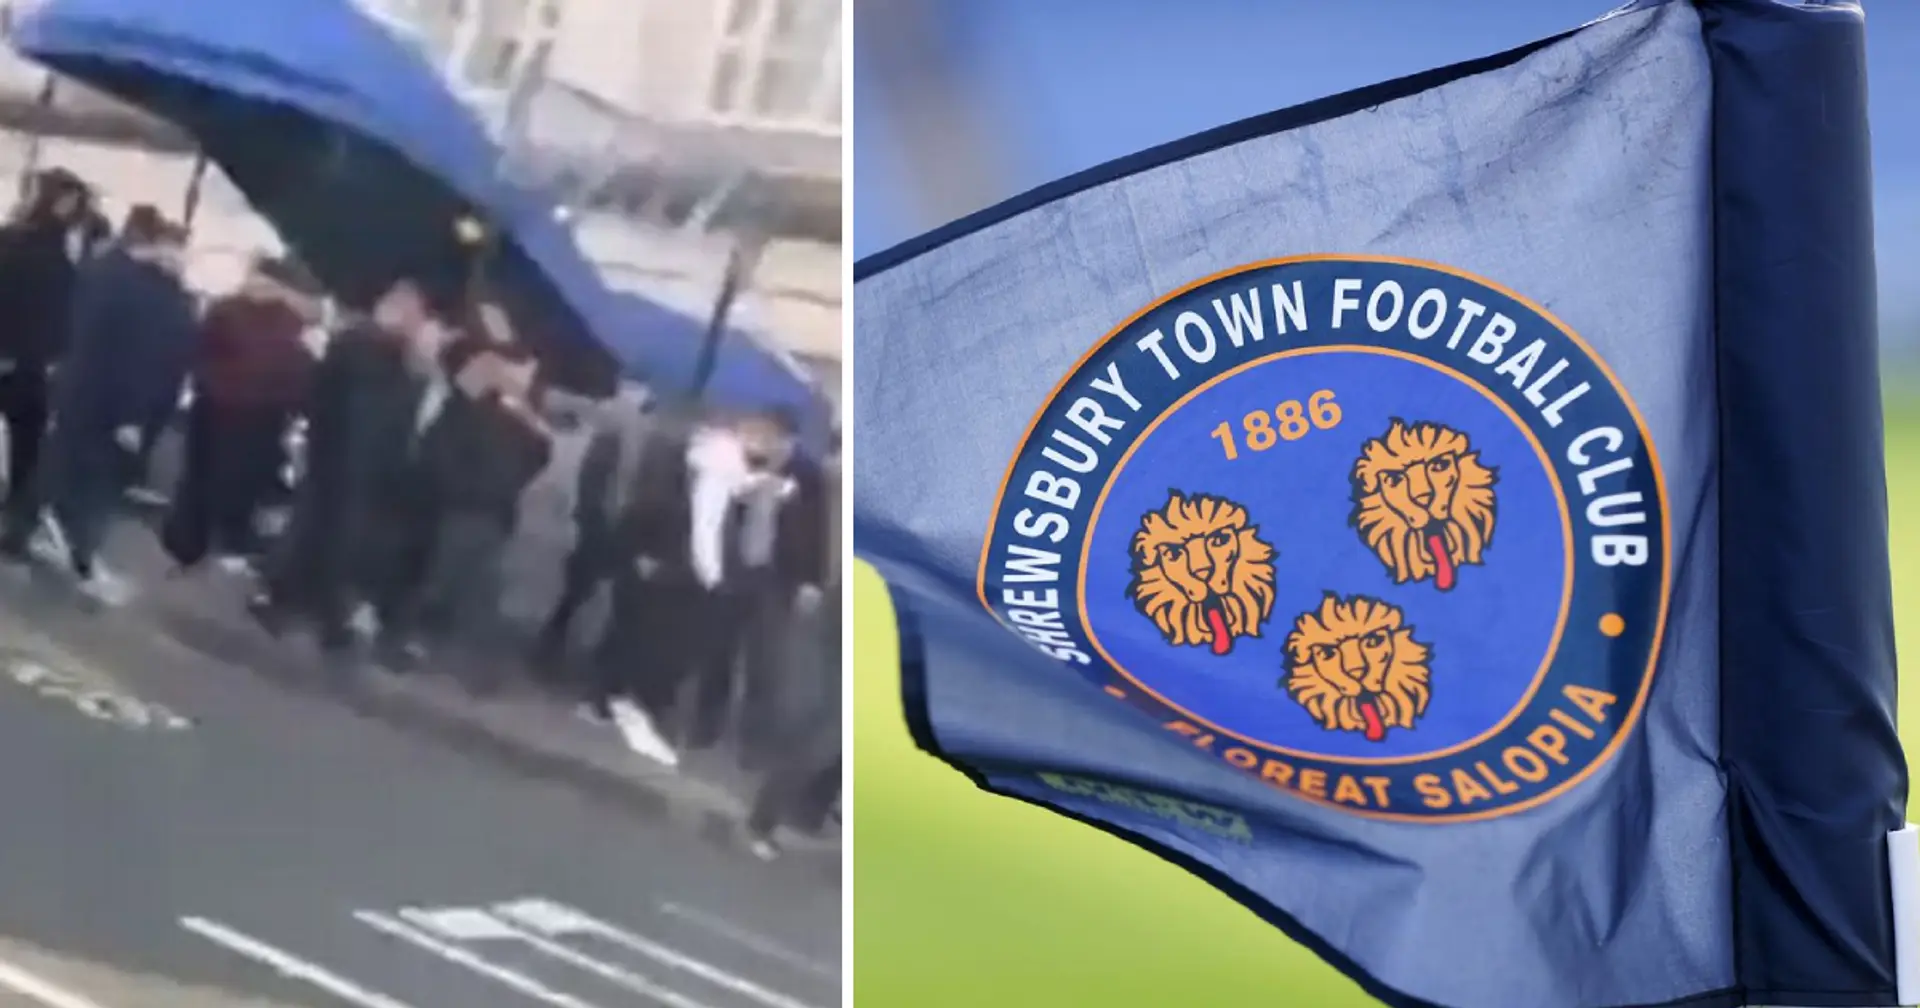 Shrewsbury to report fans to police after offensive Hillsborough chants